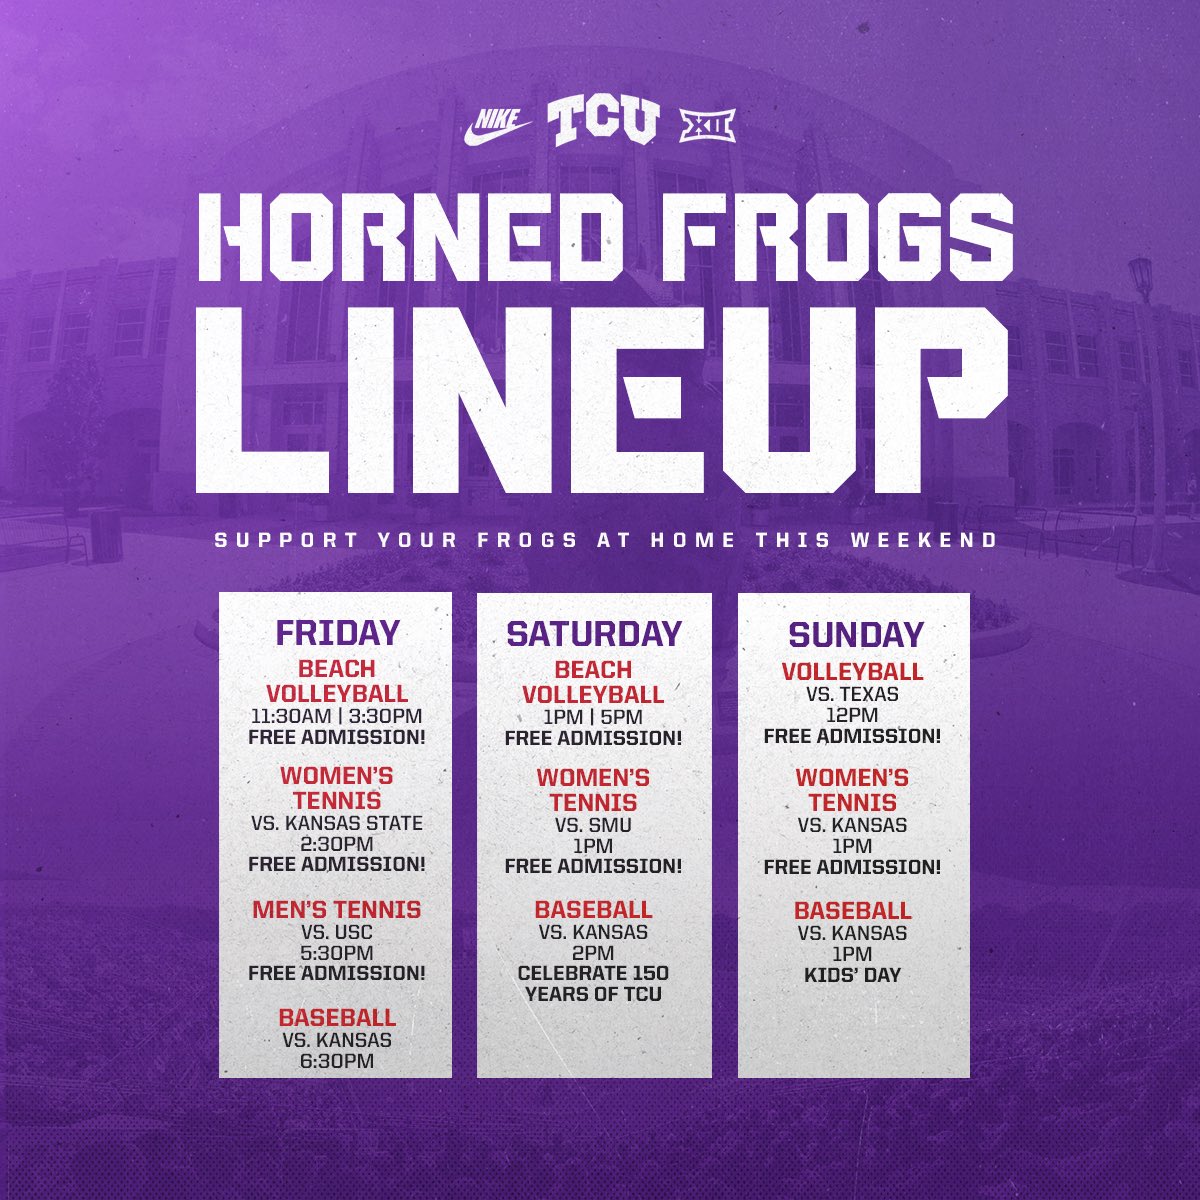 Hey Funky Town - We have your weekend plans covered! #GoFrogs